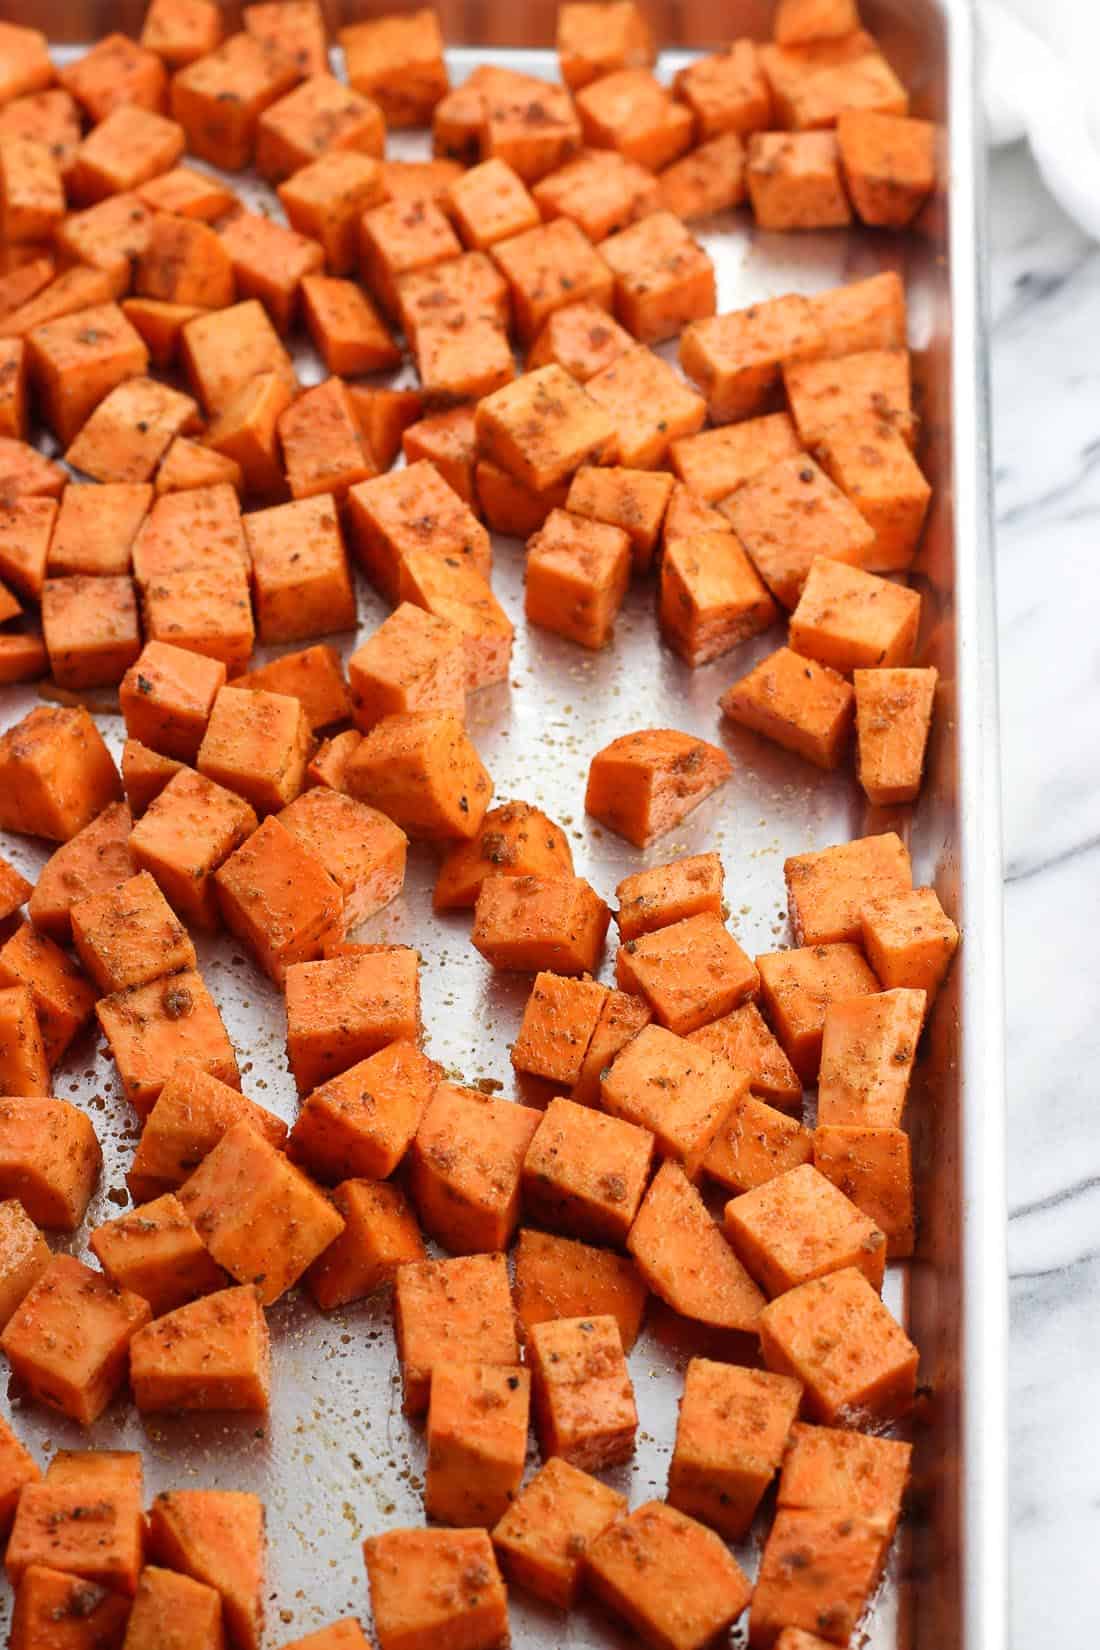 Sweet potato cubes spread onto a rimmed baking sheet in a single layer.